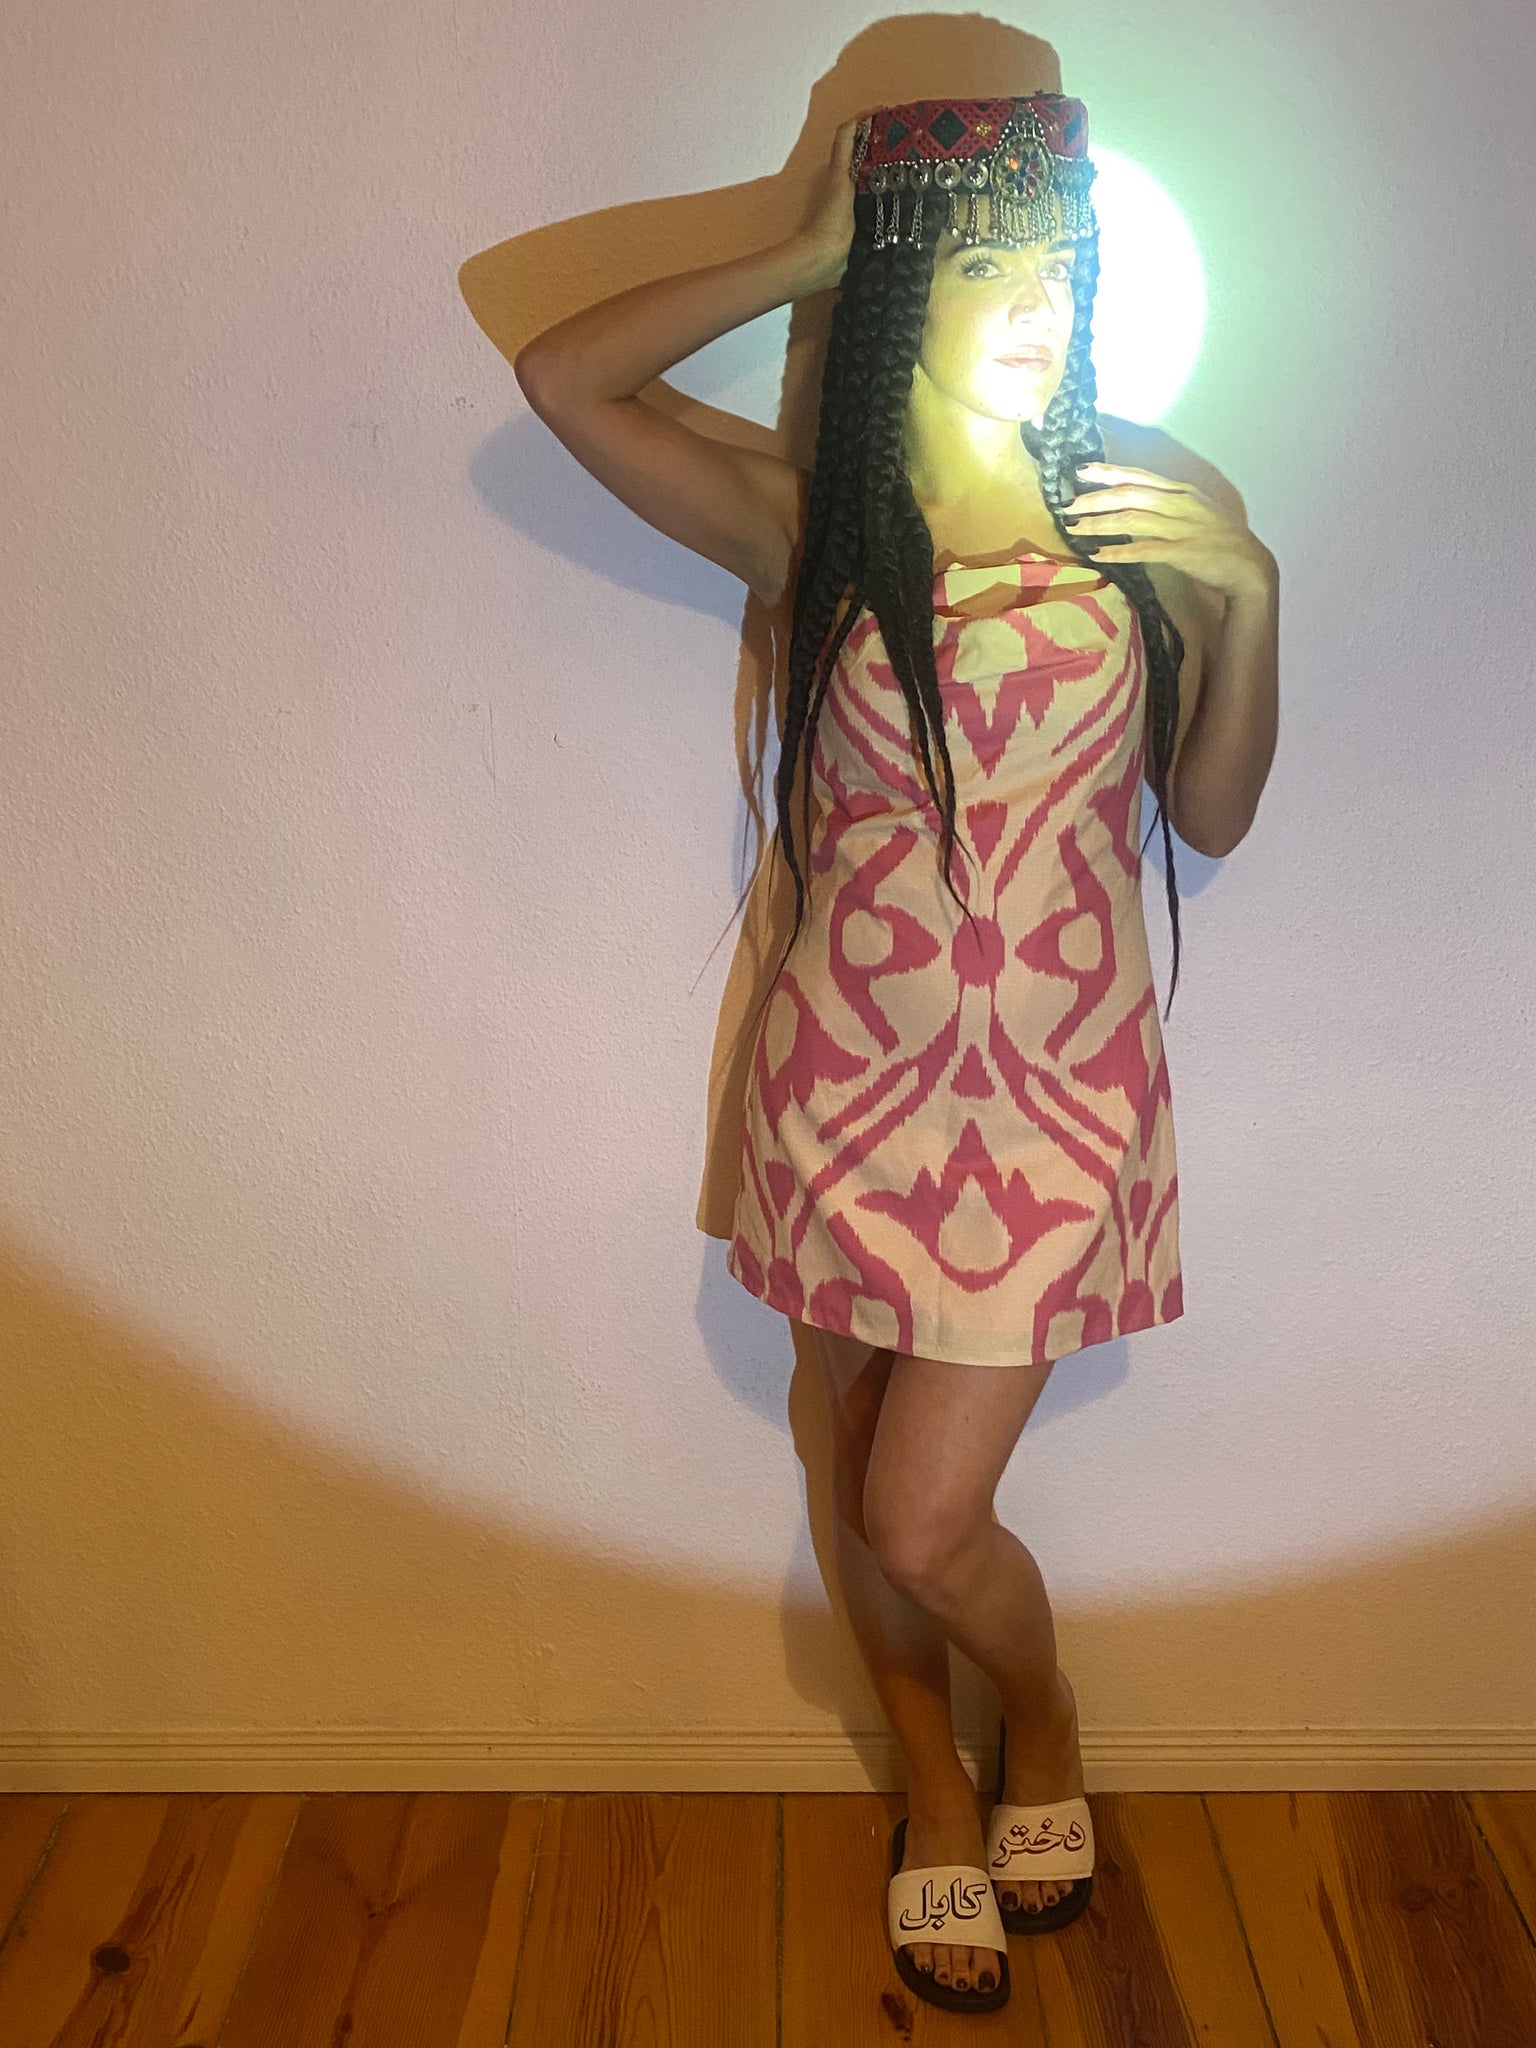 Women standing against a wall in a pink and cream dress, light shining on to her face.